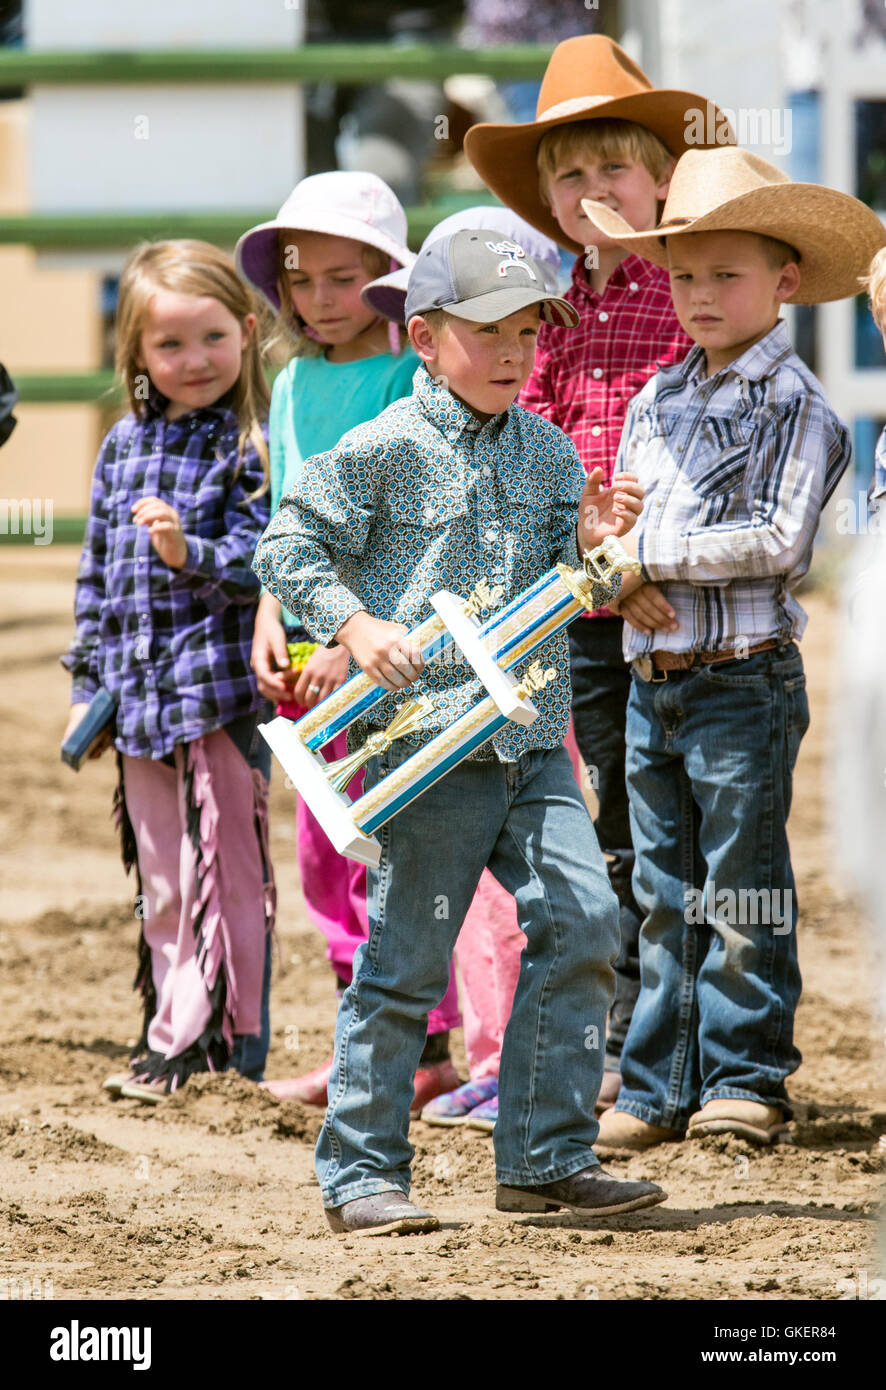 Winning Mutton Bustin' children line up for awards; Chaffee County Fair & Rodeo, Salida, Colorado, USA Stock Photo